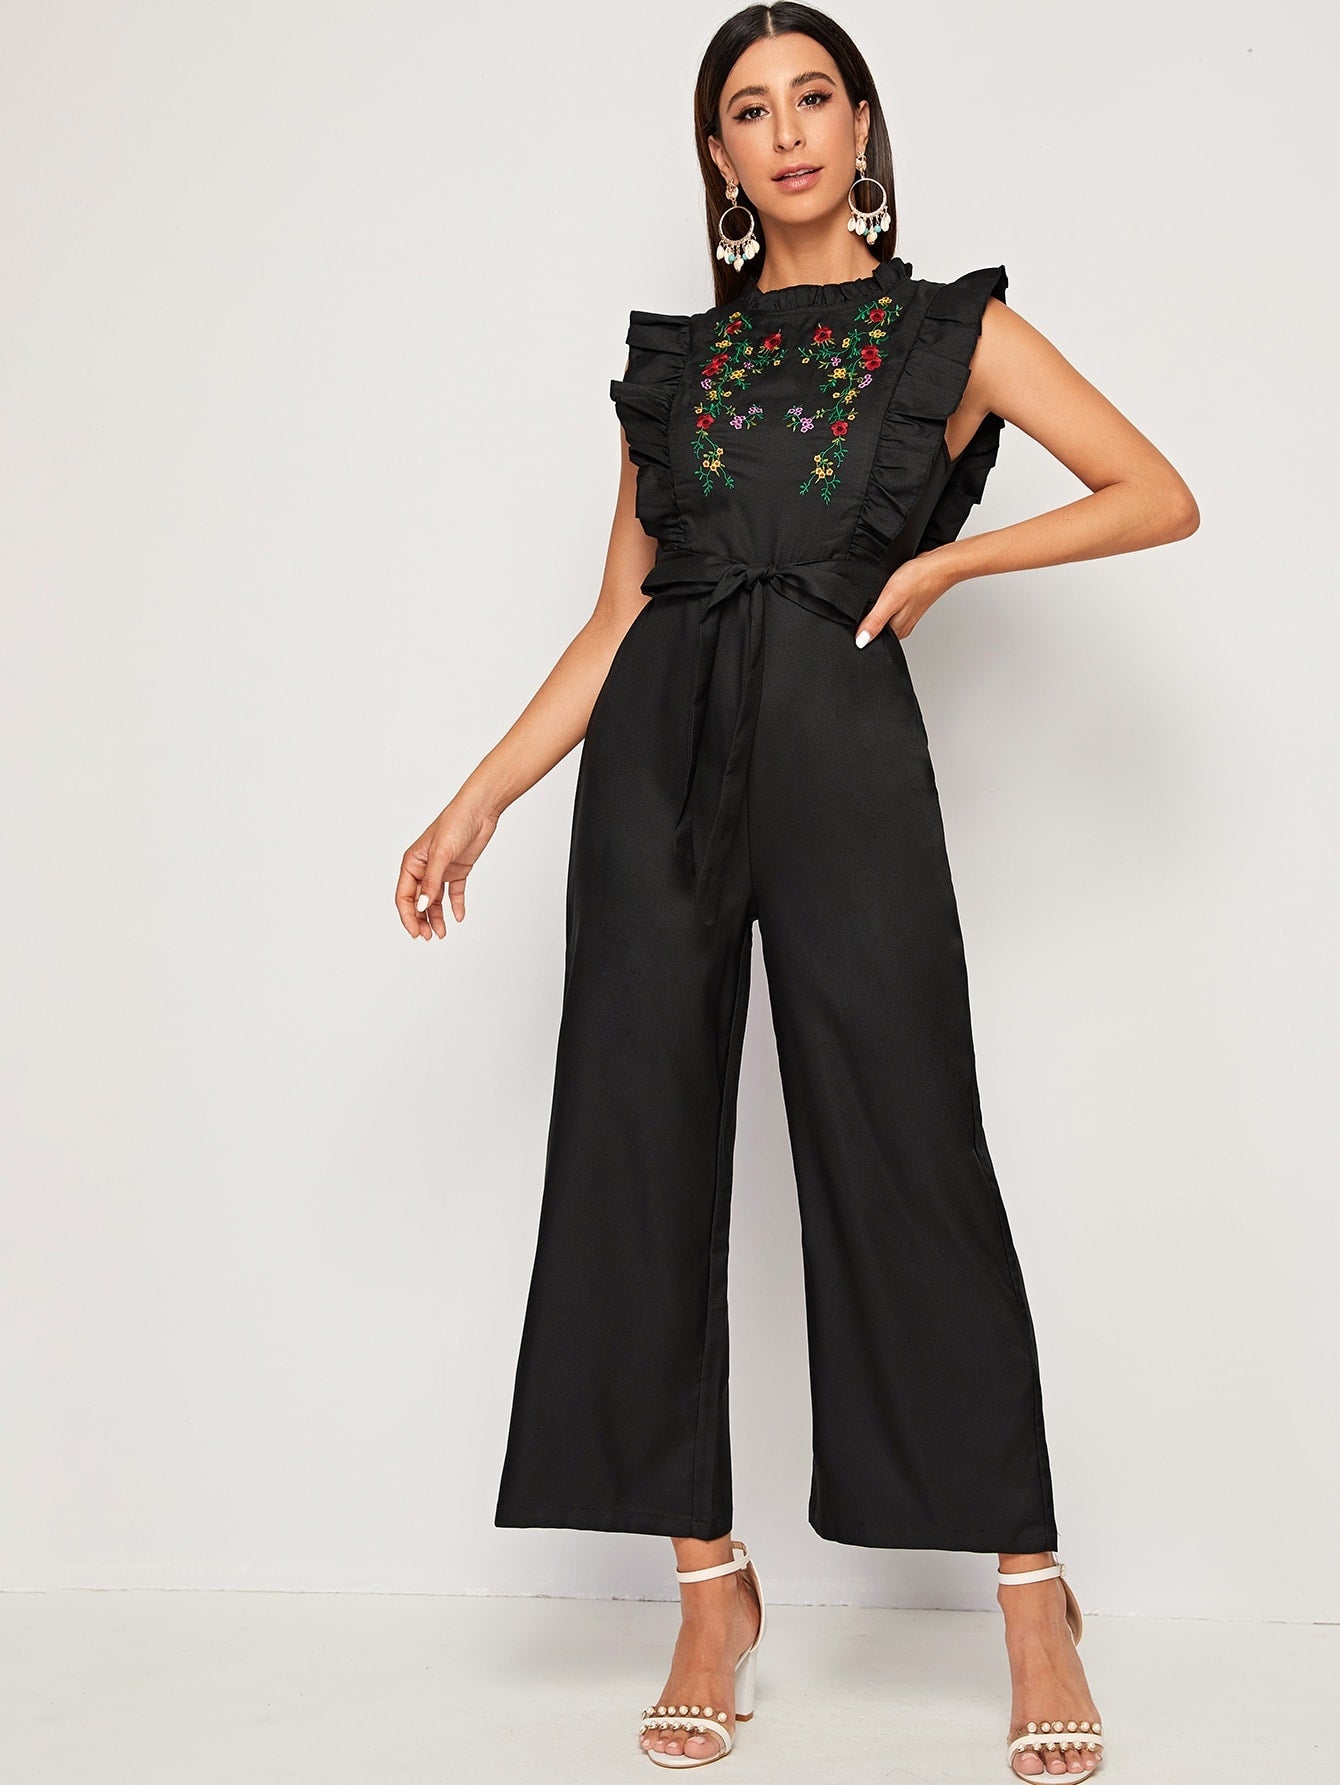 Floral Embroidered Ruffle Trim Belted Jumpsuit